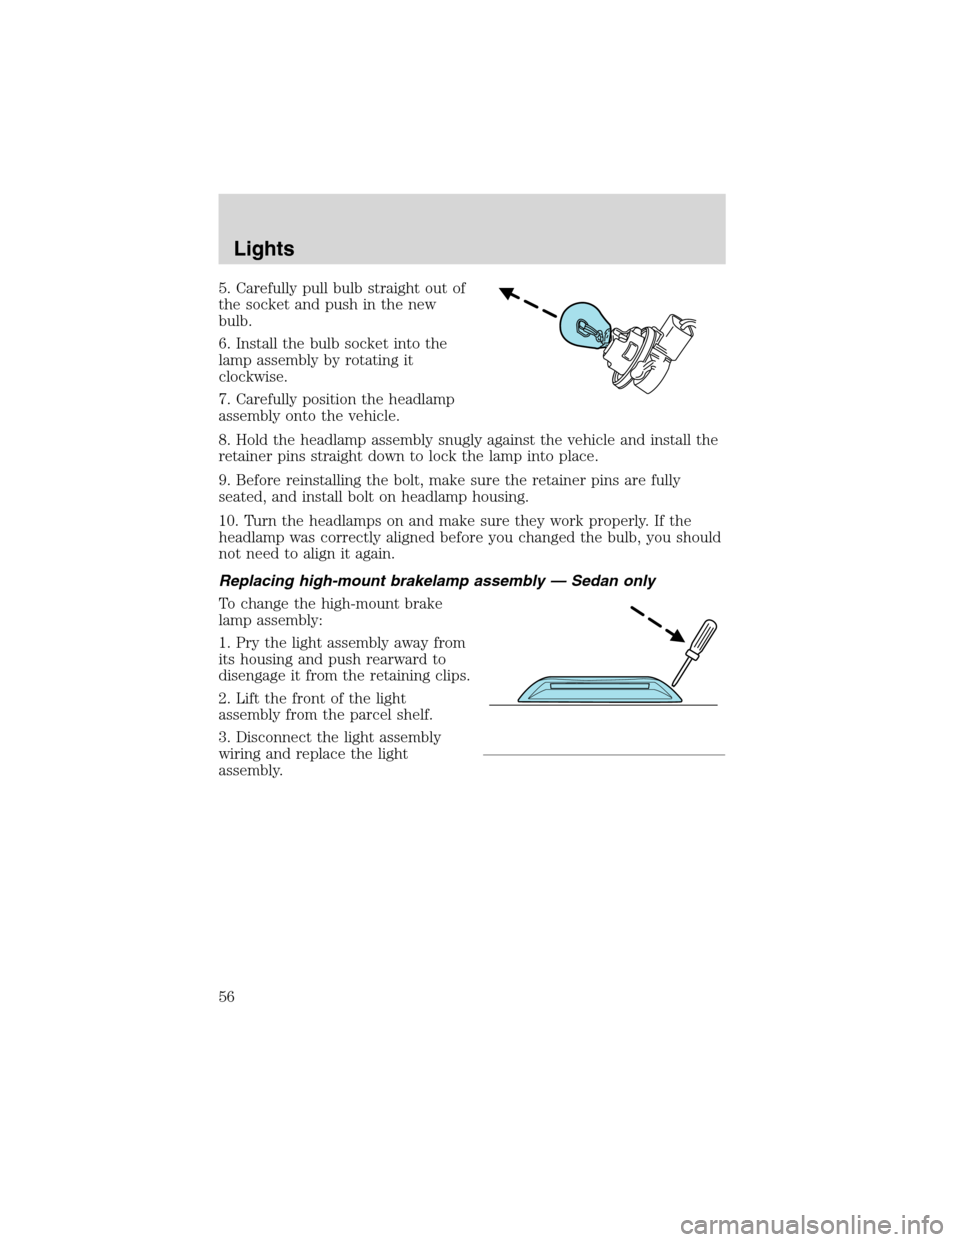 Mercury Sable 2002  Owners Manuals 5. Carefully pull bulb straight out of
the socket and push in the new
bulb.
6. Install the bulb socket into the
lamp assembly by rotating it
clockwise.
7. Carefully position the headlamp
assembly onto